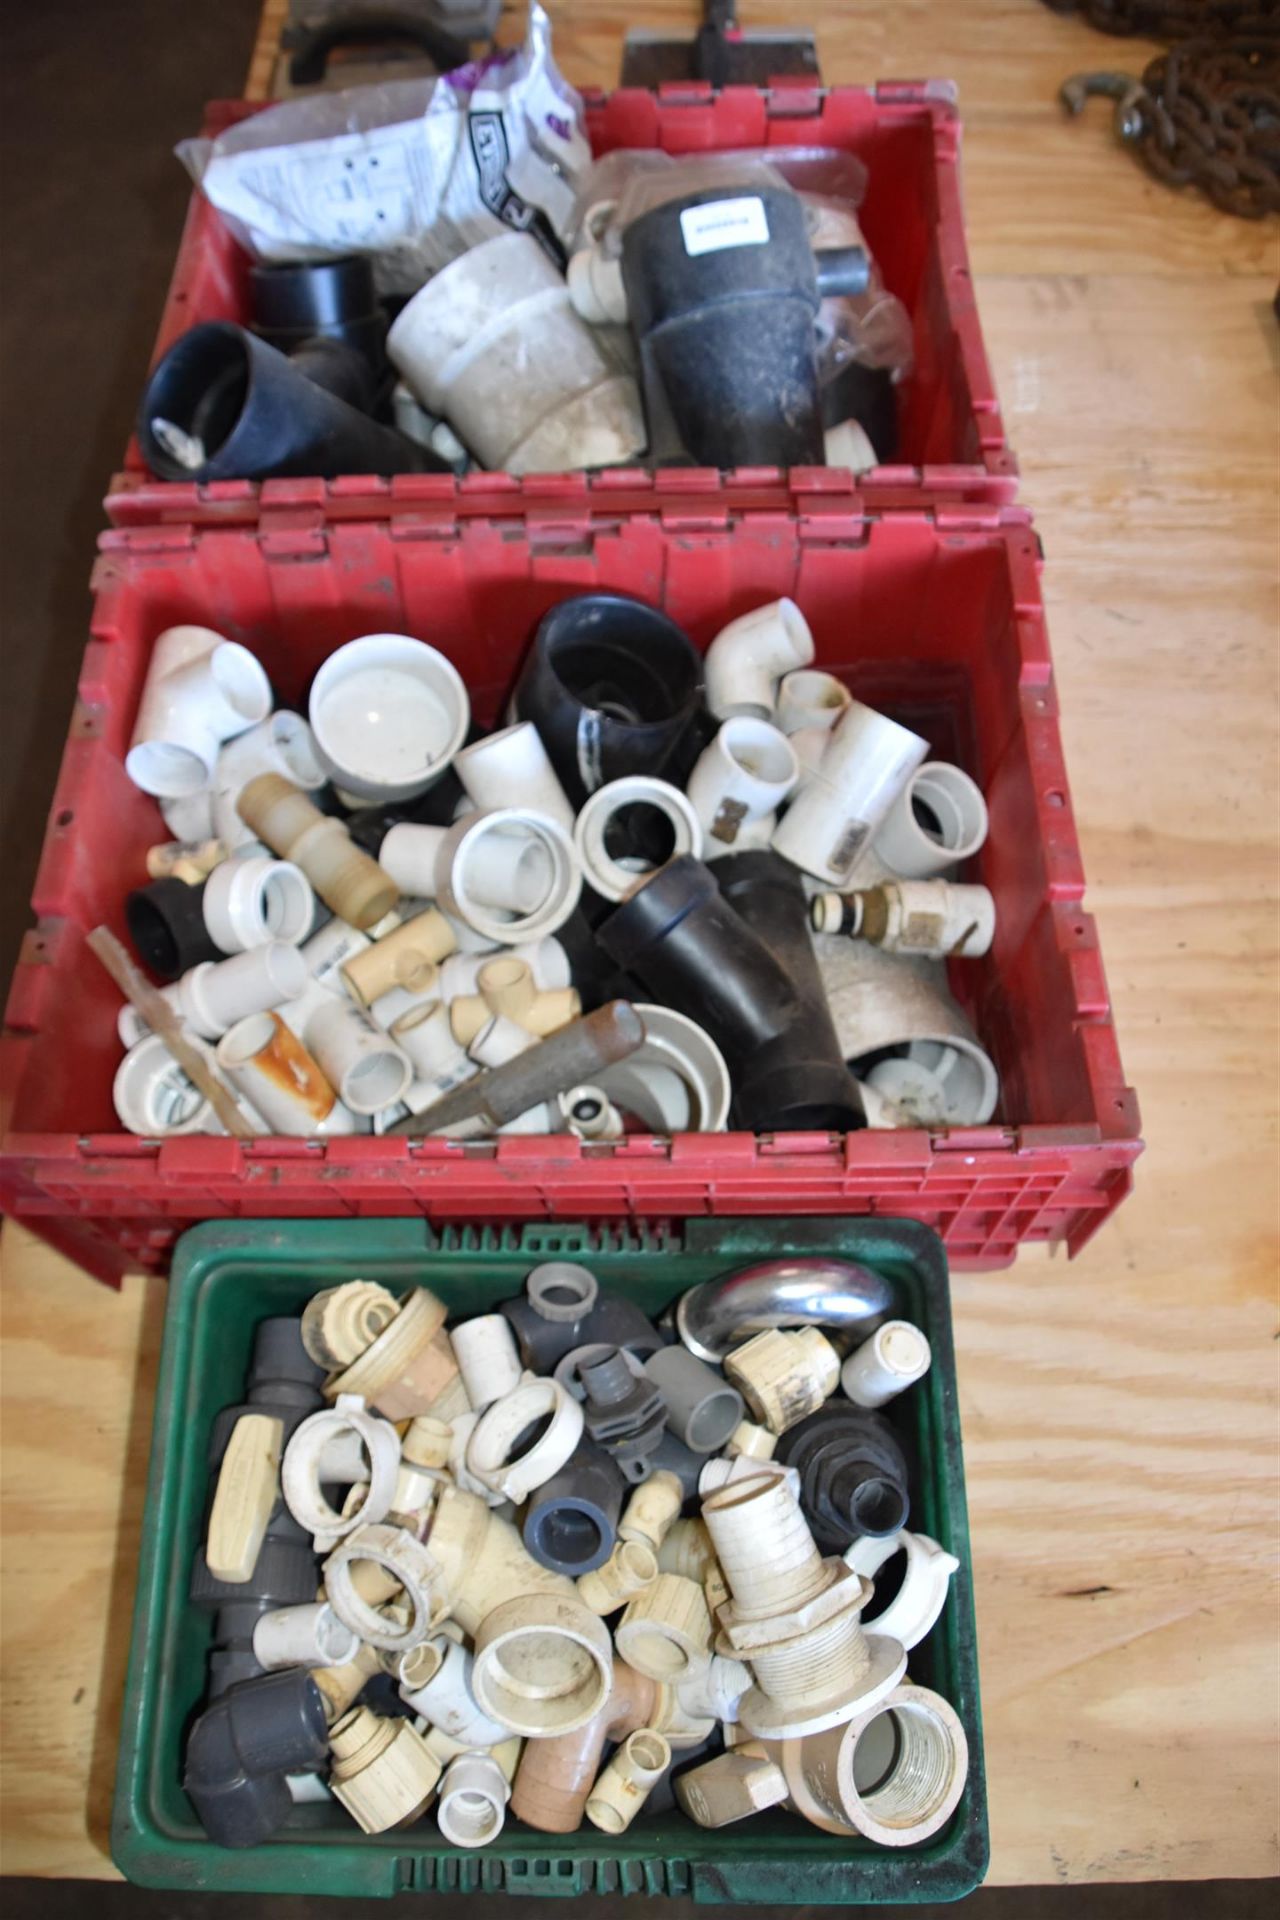 PVC Fittings and Valves